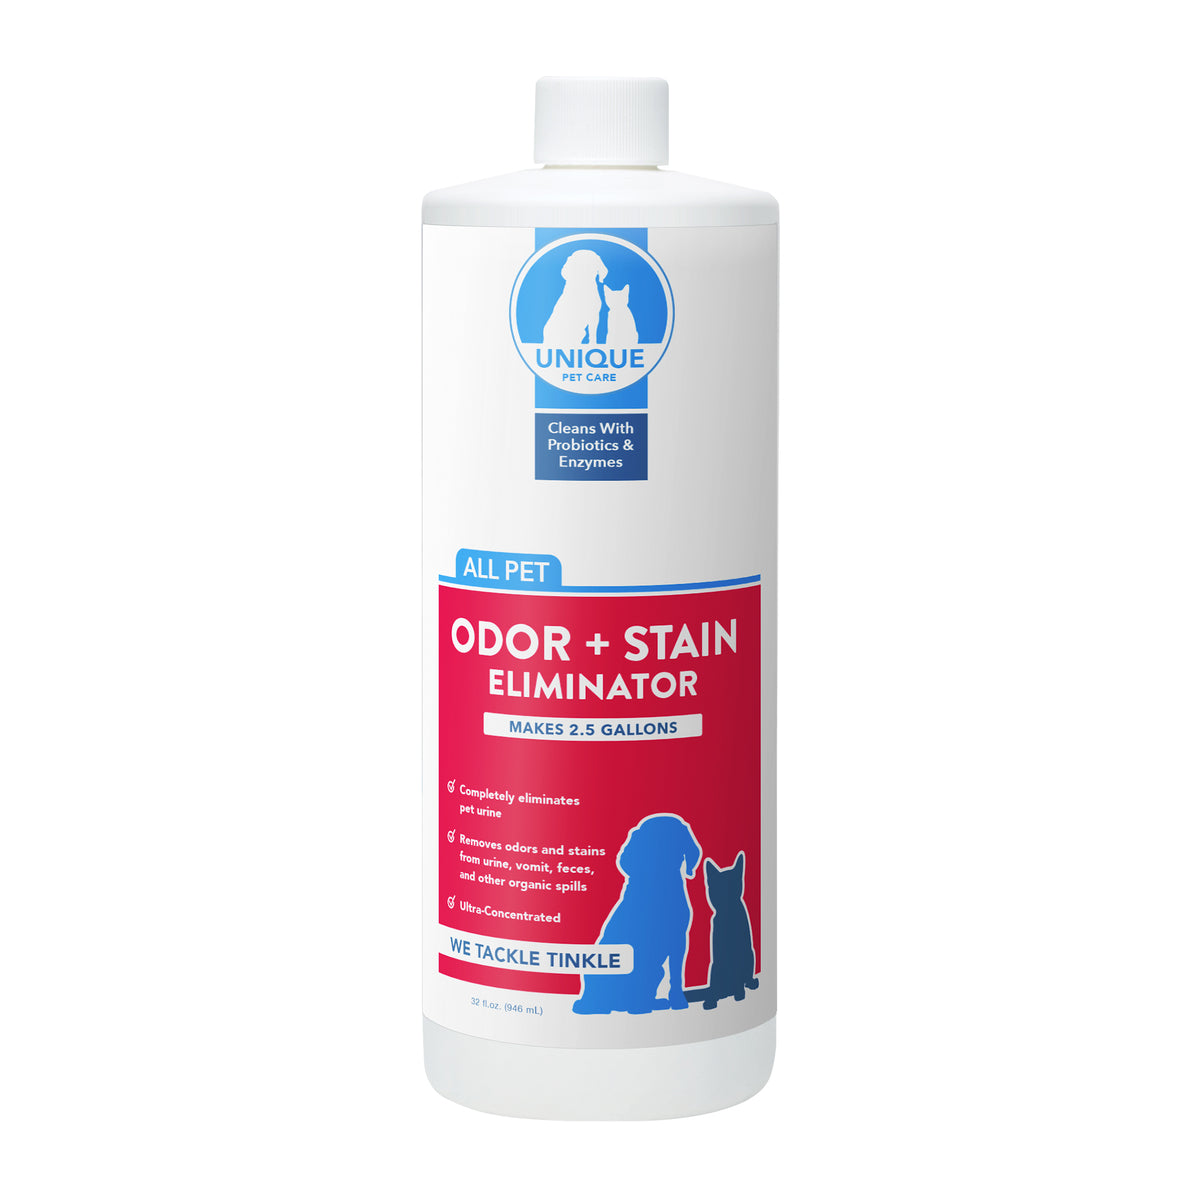 Unique Pet Odor and Stain Eliminator 32 oz. Quart Formulated with Trust - Stain odor and urine remover - works fast to remove the worst stains and odors on all surfaces